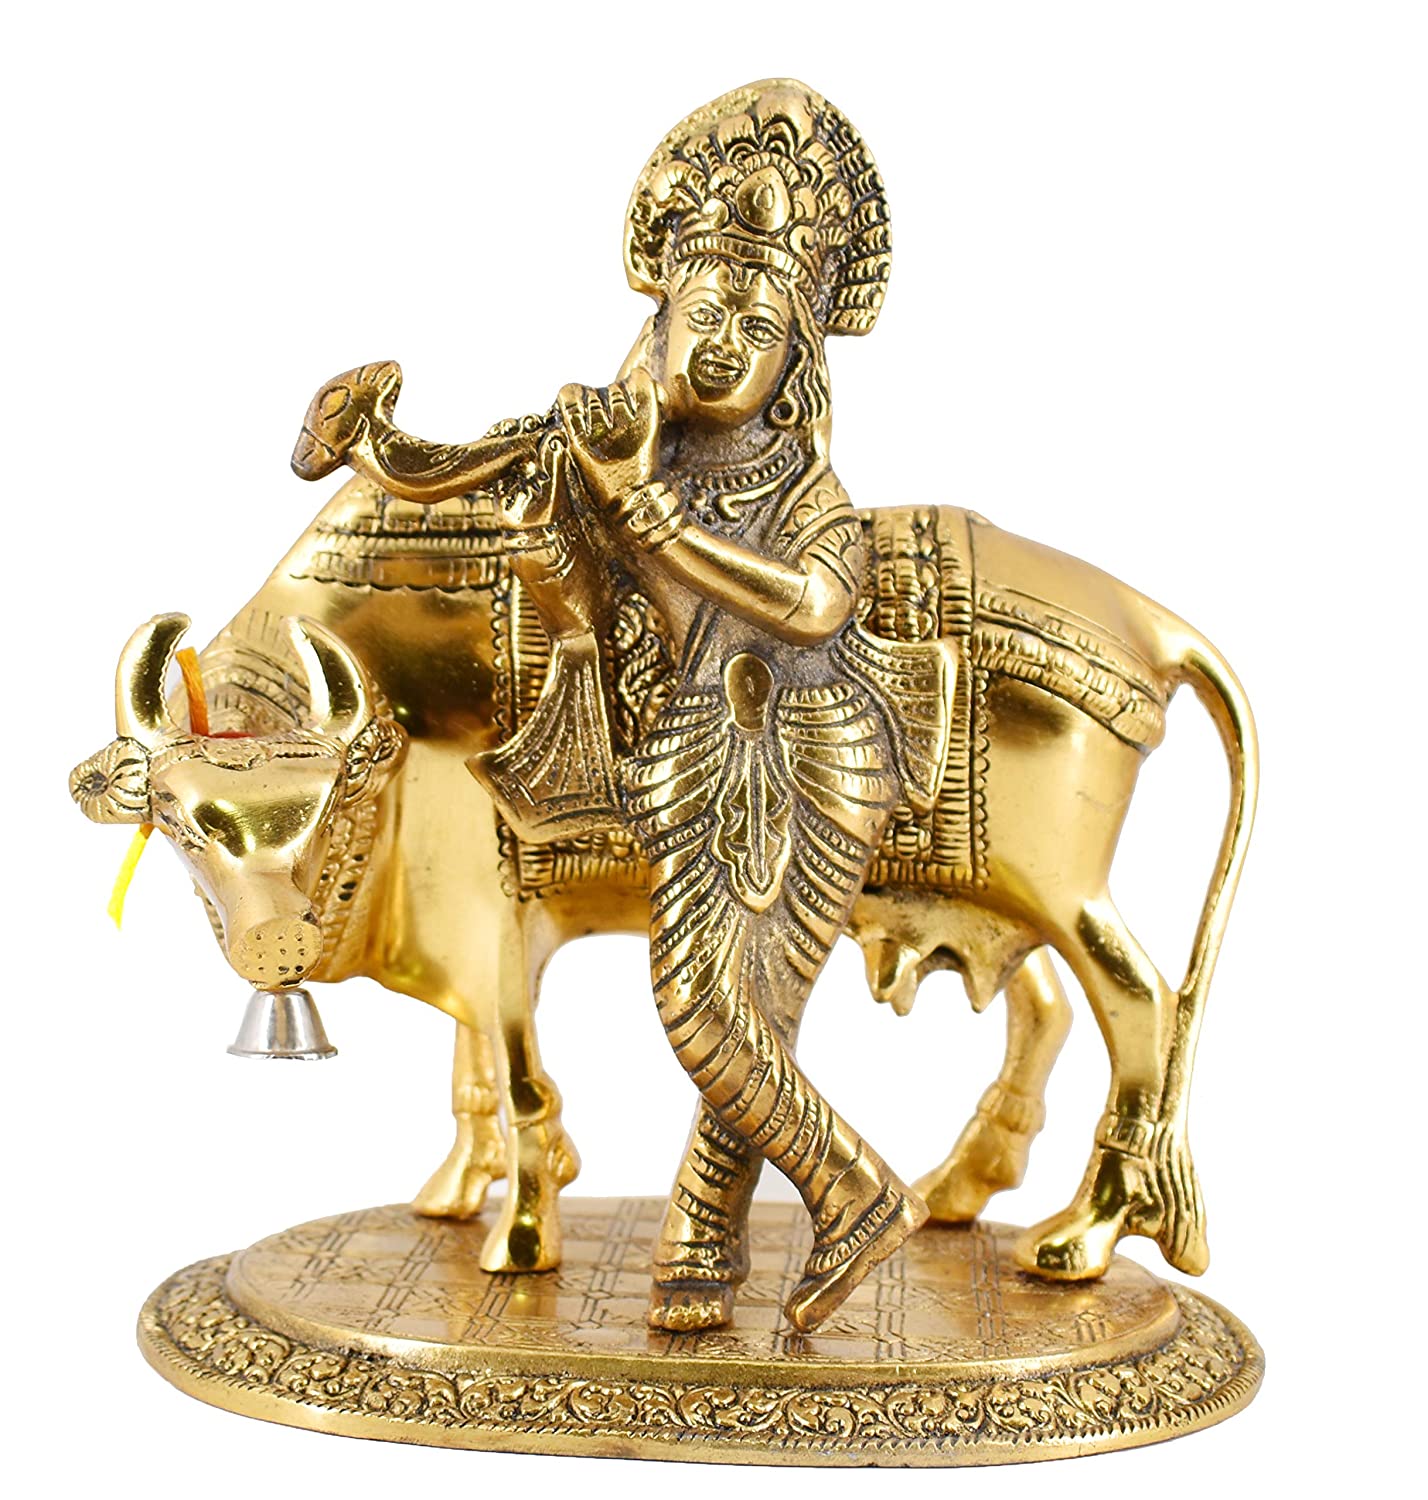 14inch krishna statues at lowest price/ it is amazing gift item